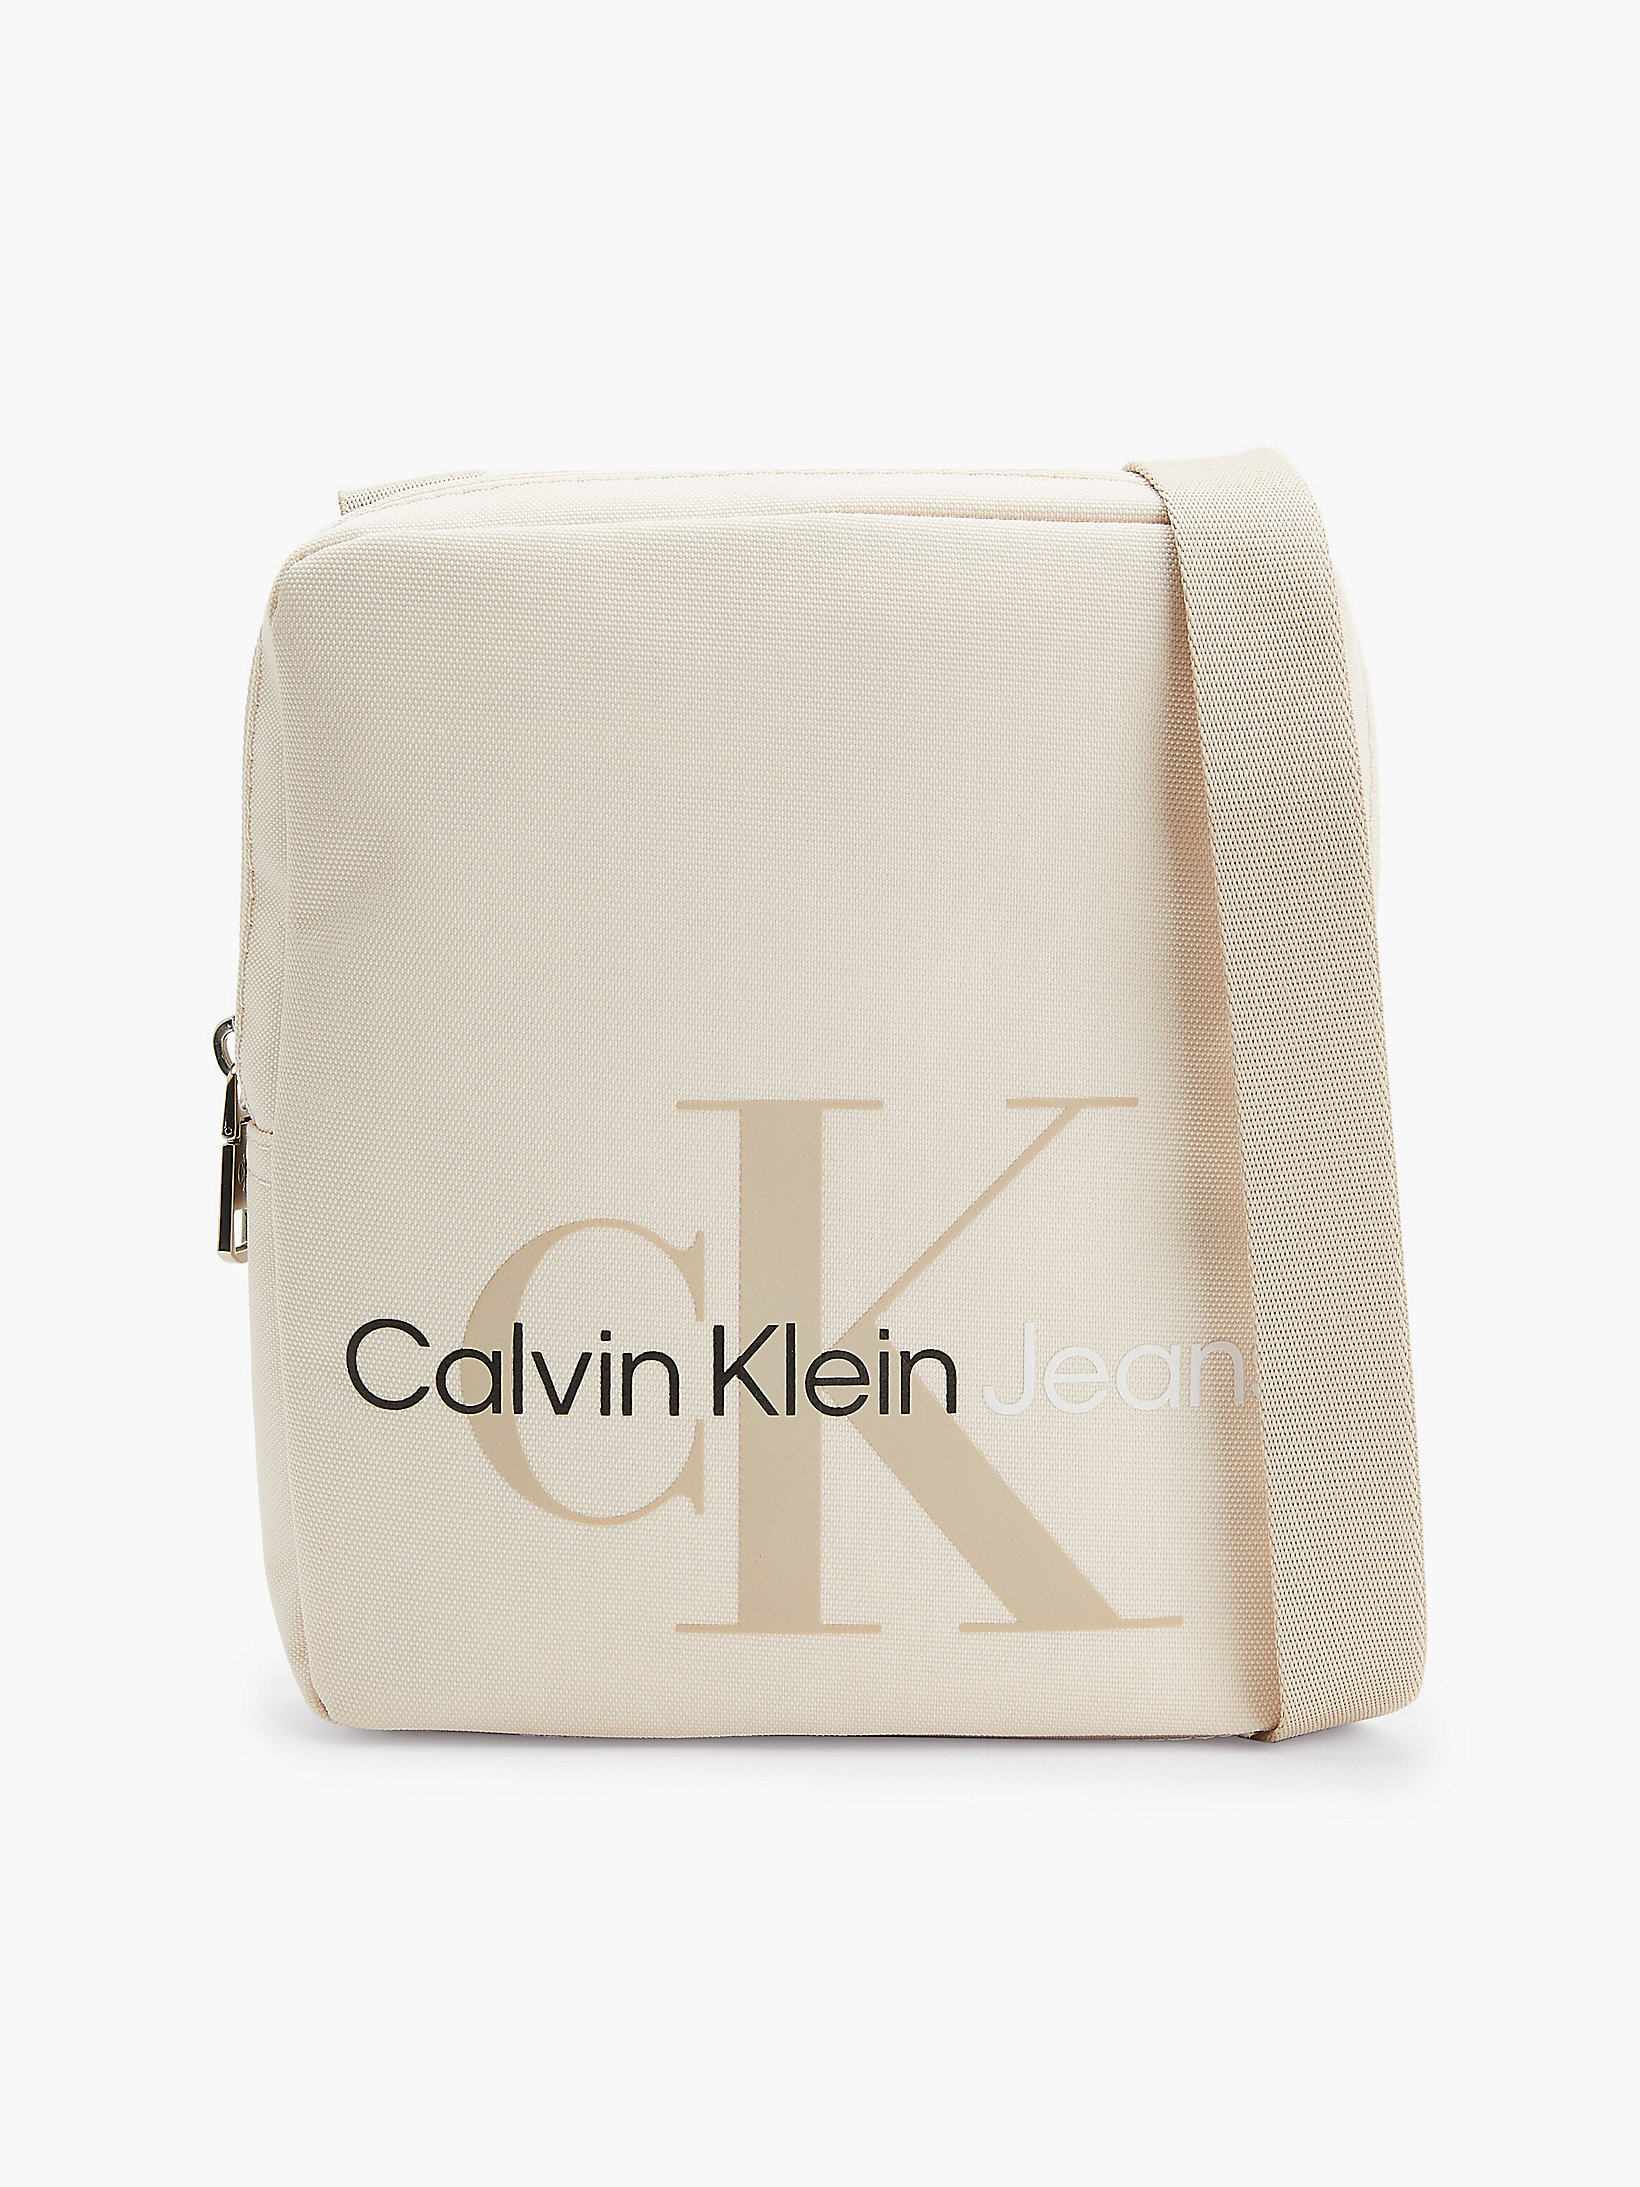 Tuscan Beige Recycled Polyester Crossbody Bag undefined men Calvin Klein